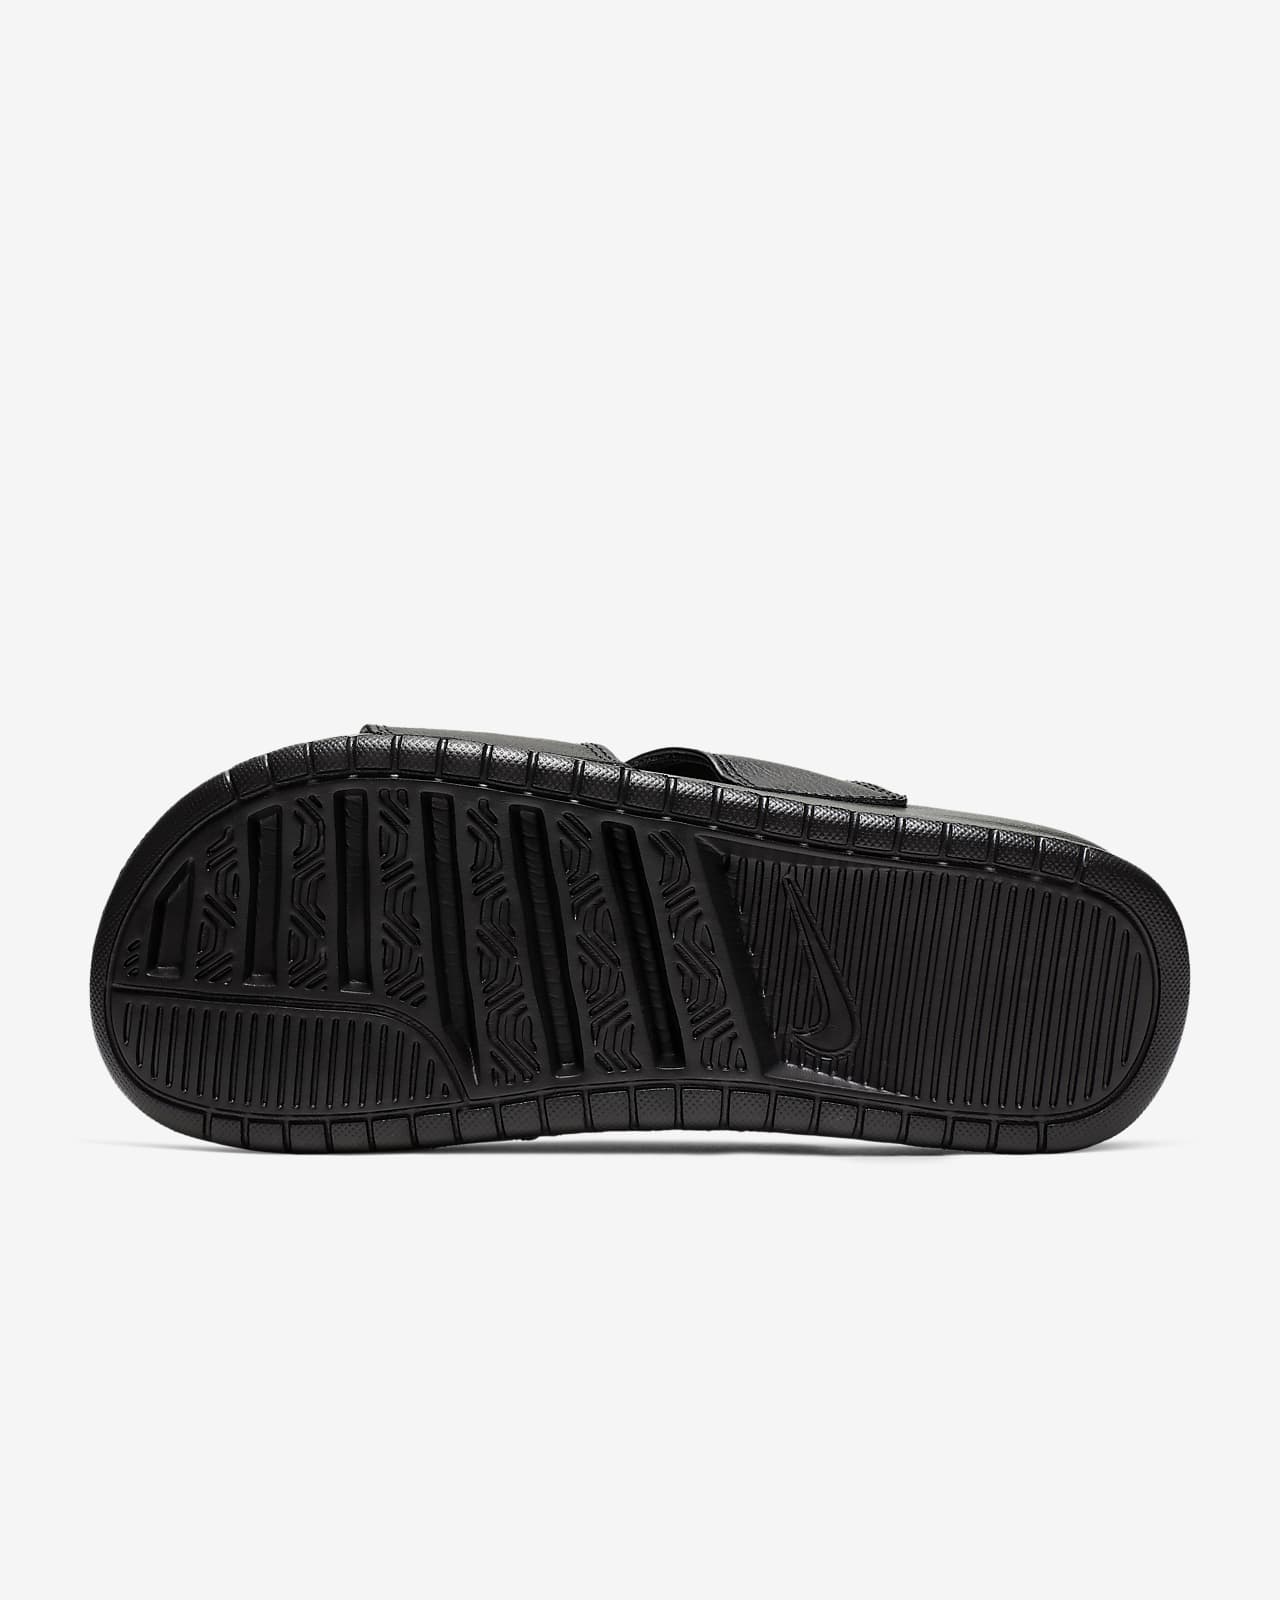 nike slides with strap in back